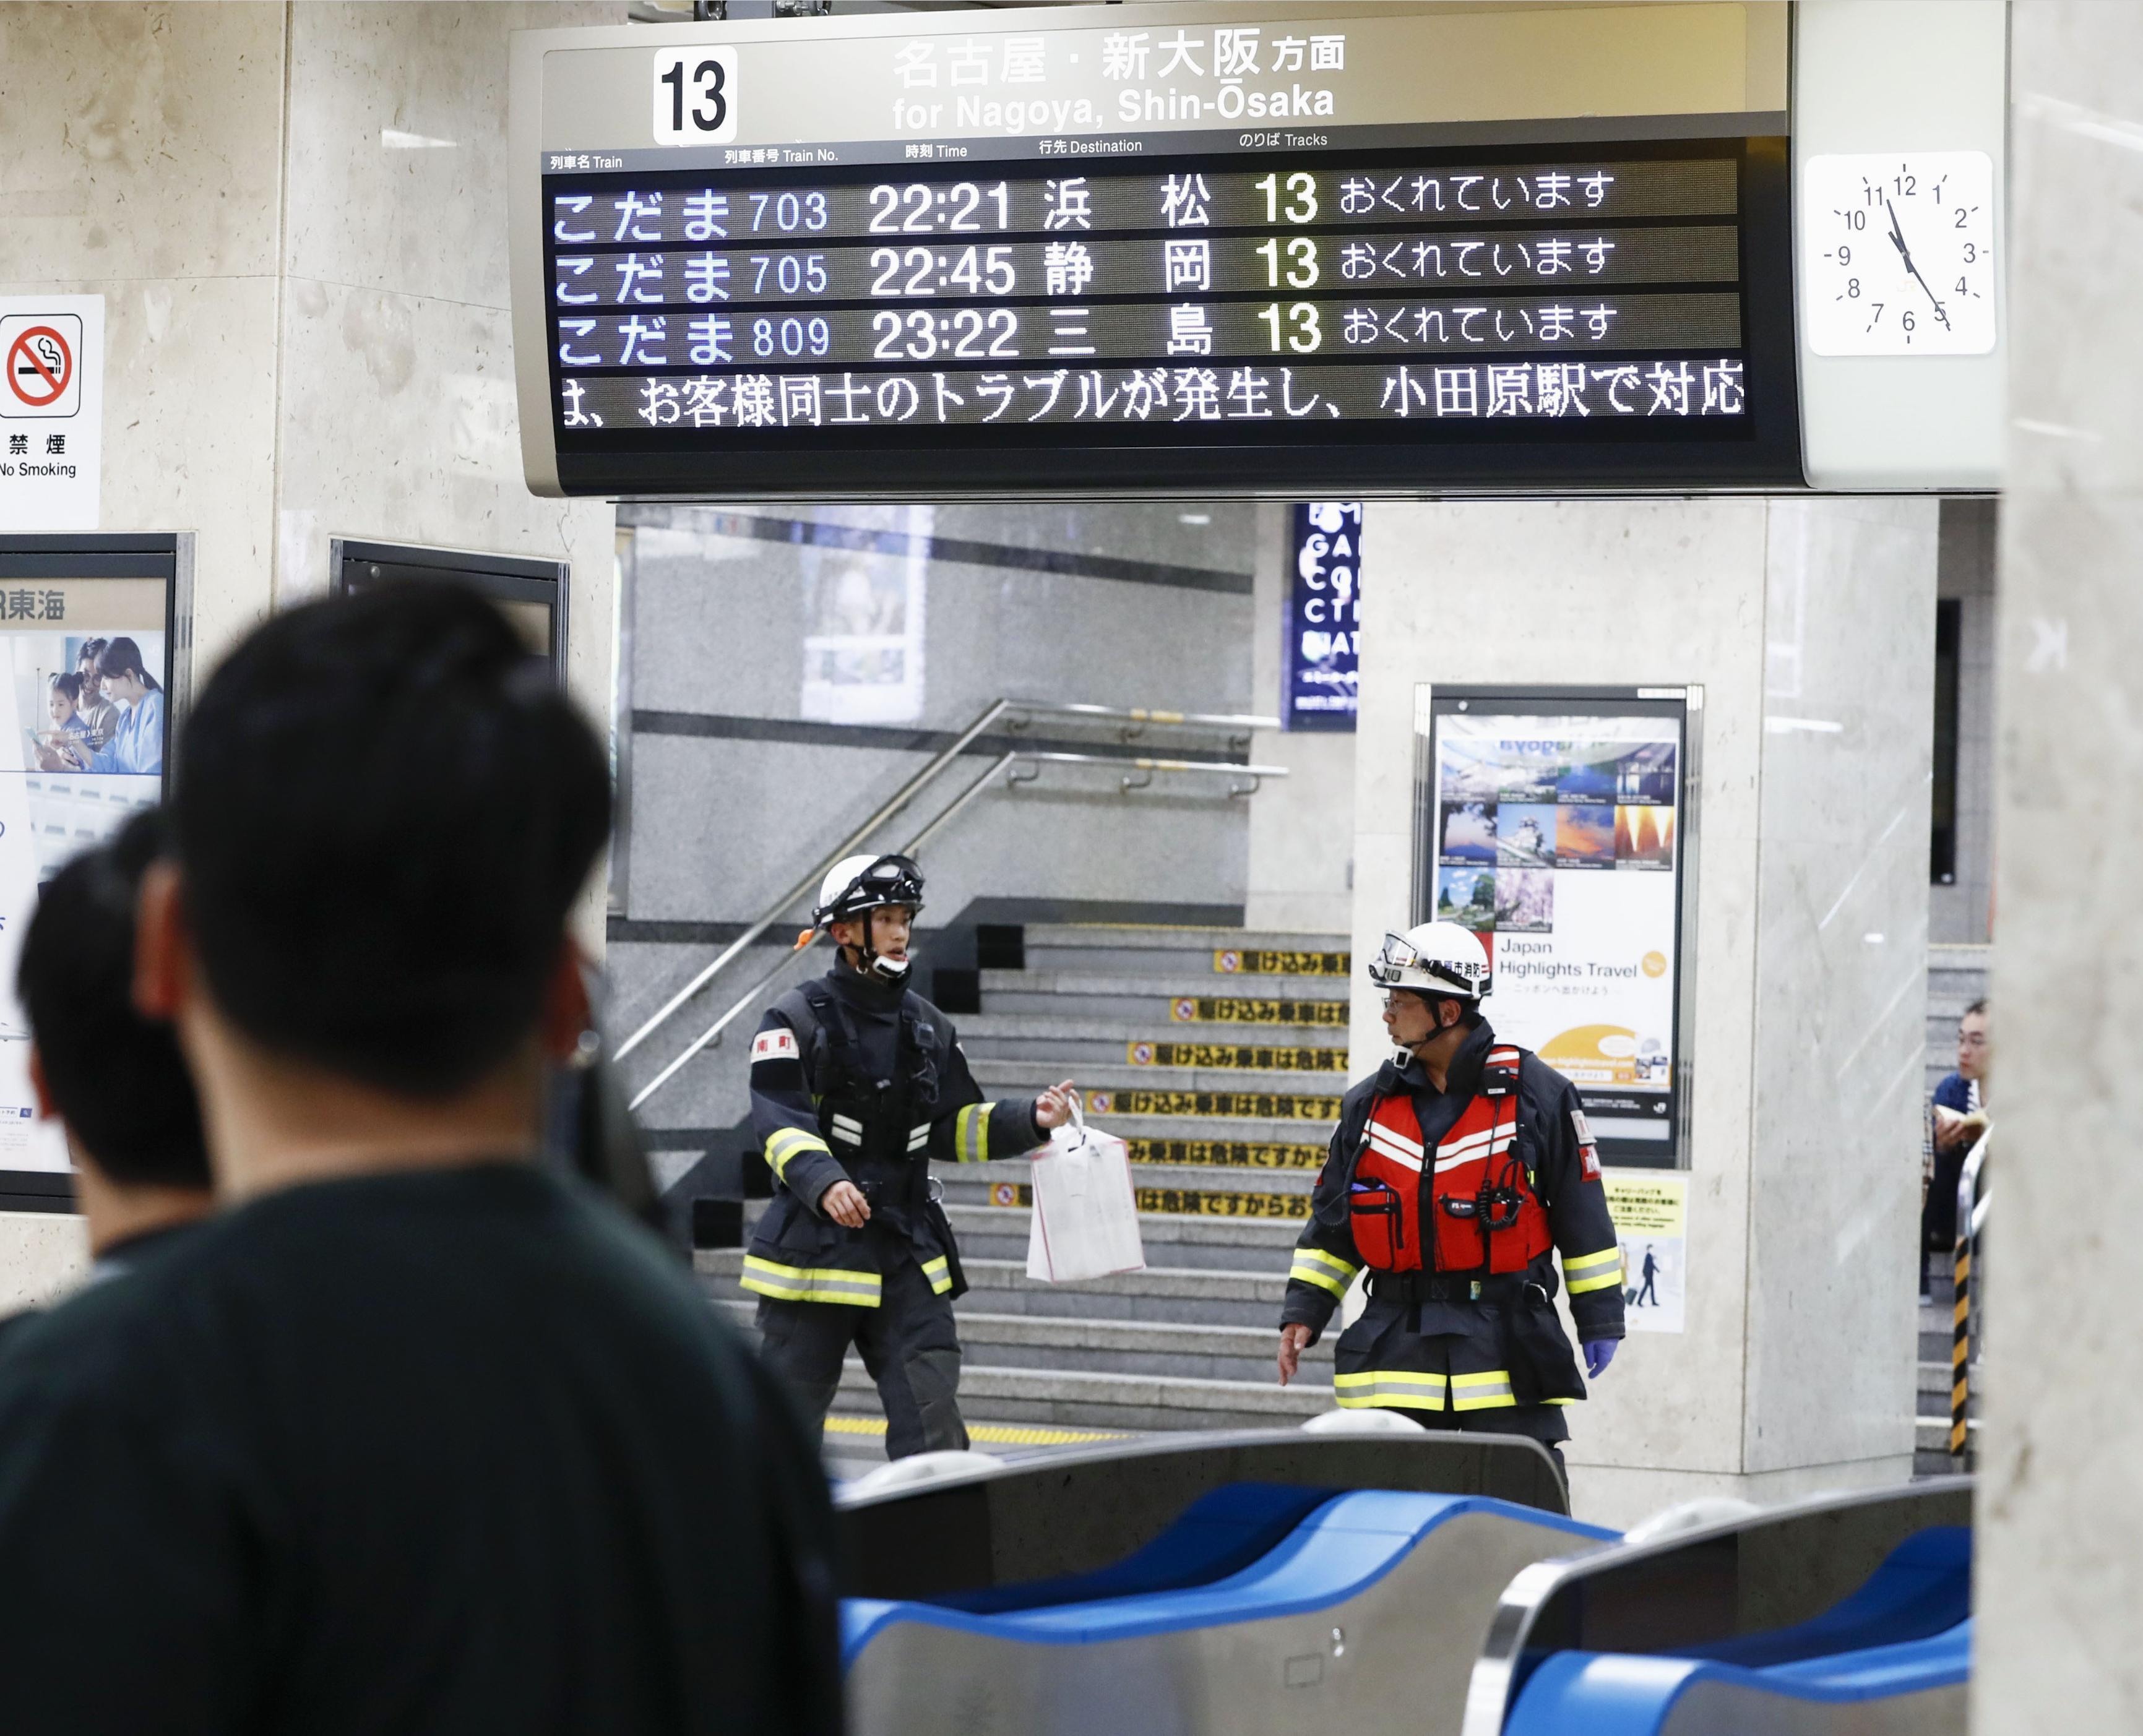 Firefighters at Odawara station in Japan